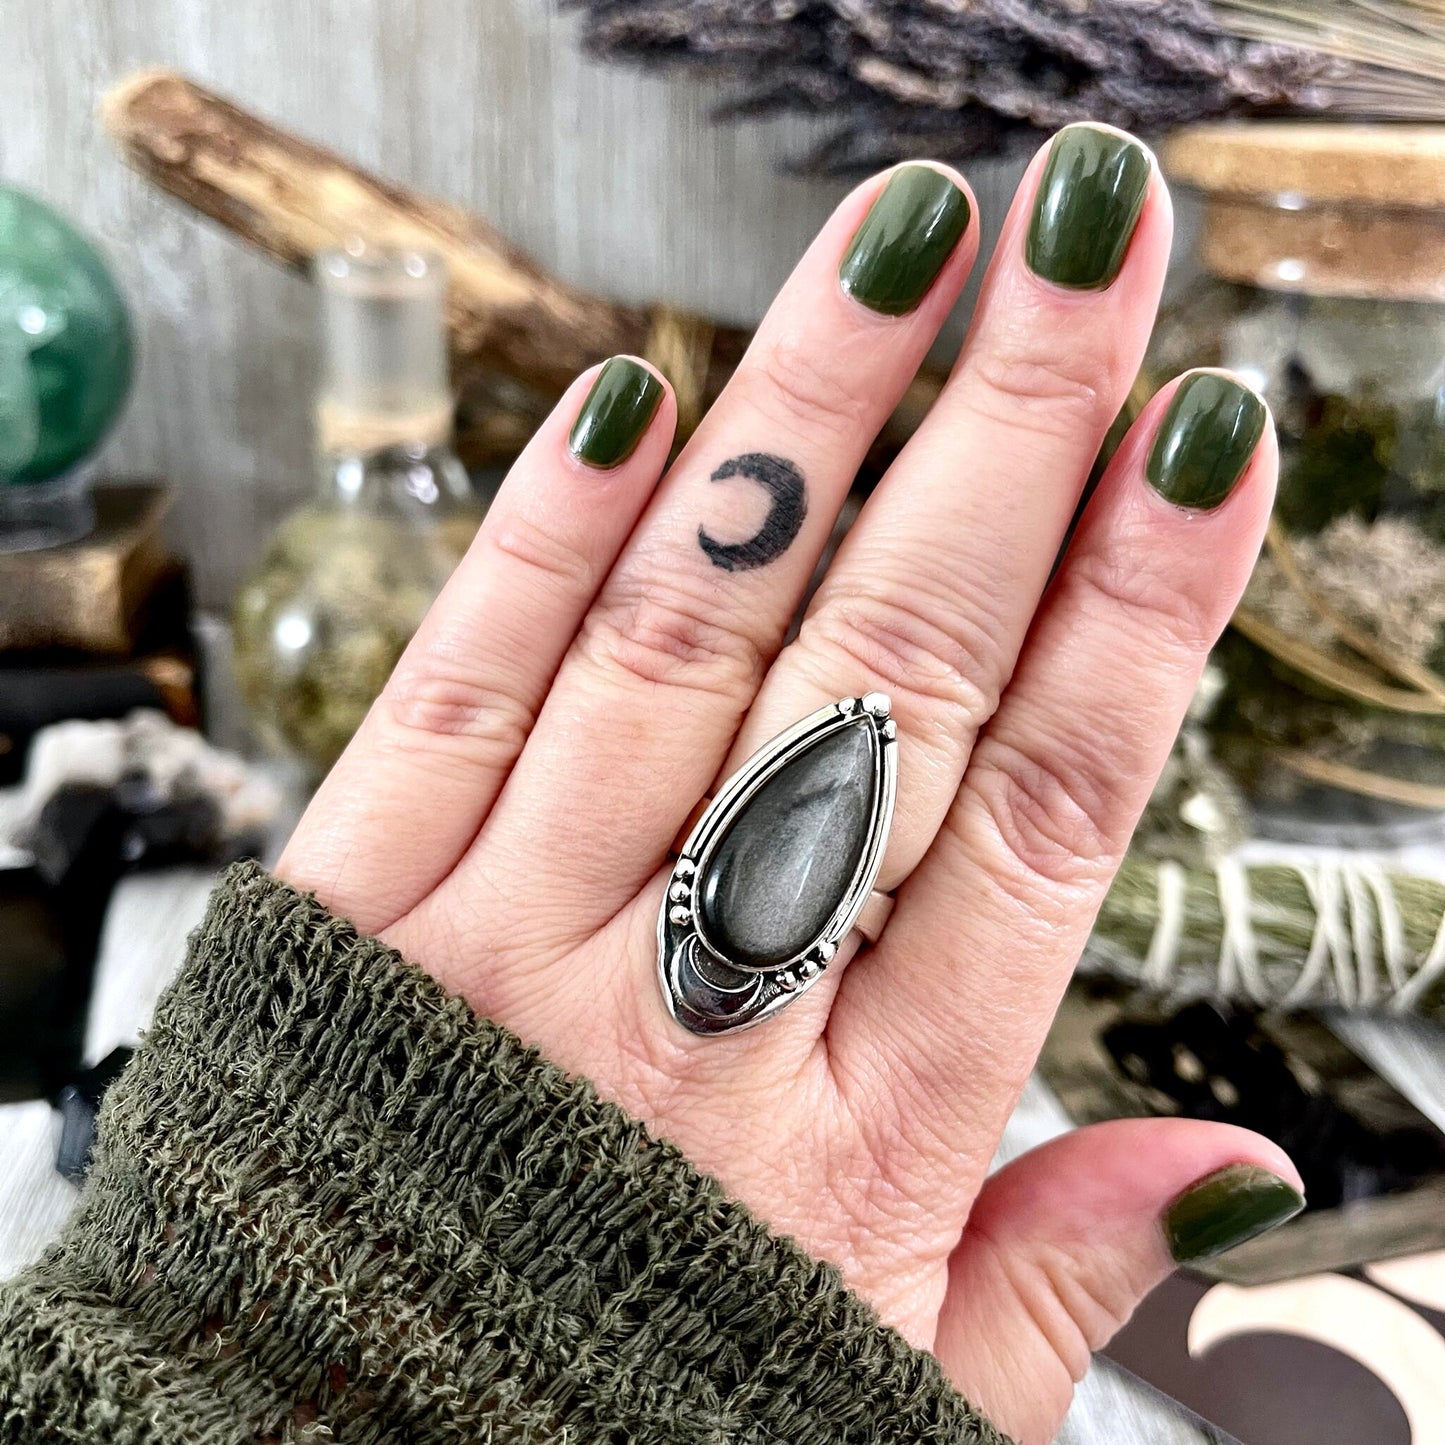 Midnight Moon Silver Sheen Obsidian Teardrop Crystal Ring in Sterling Silver- Designed by FOXLARK Collection Adjustable to Size 6 7 8 9